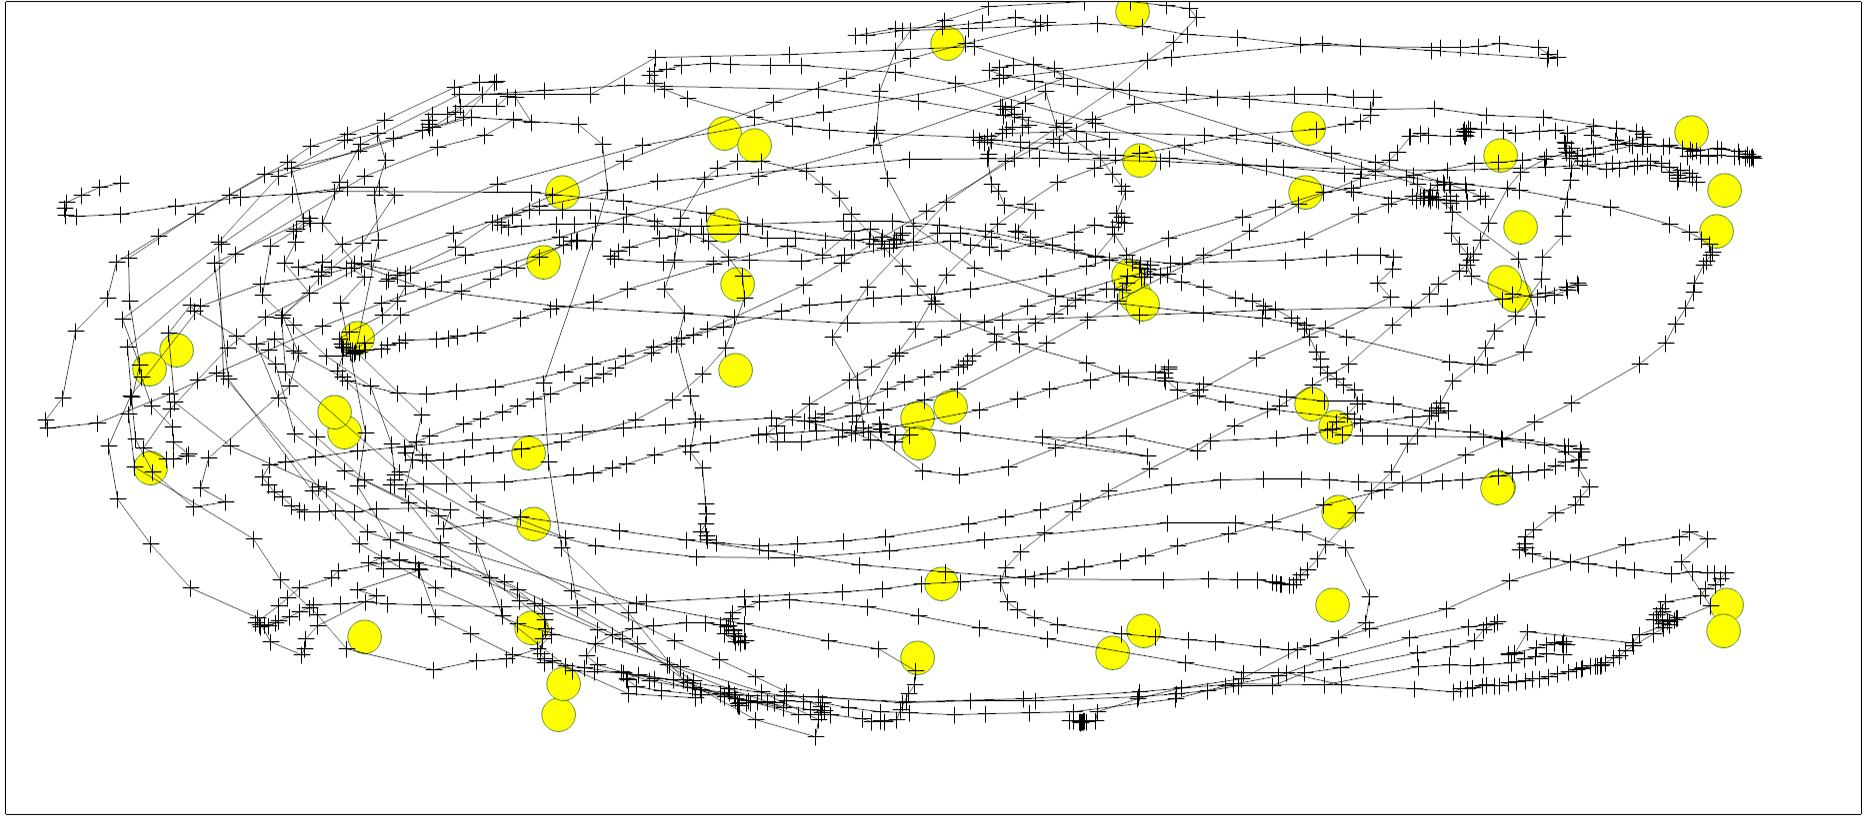 An example of hand’s trajectory during an exercise; the yellow circles indicate where the virtual hand (moved by the child) hit the virtual bubbles.